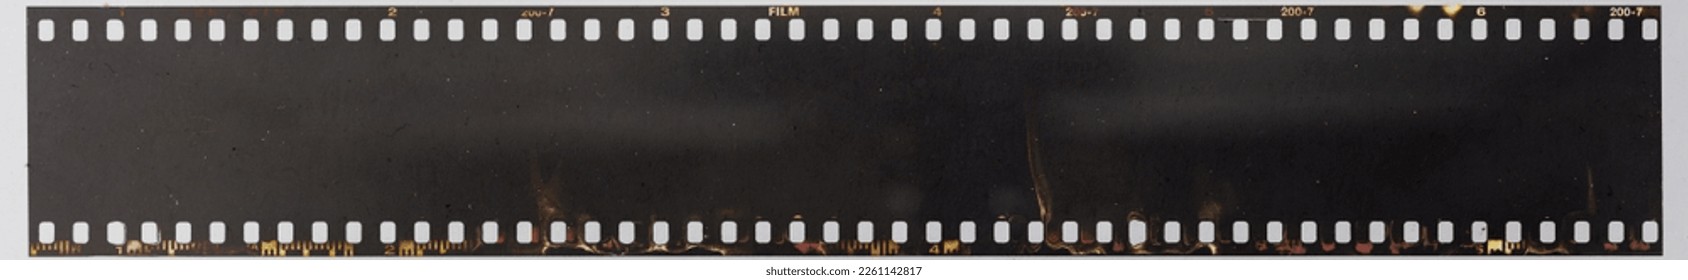 real macro photo of long 35mm filmstrip under dirty glass plate on white paper background. film material with dust. blank photo mock up. - Powered by Shutterstock